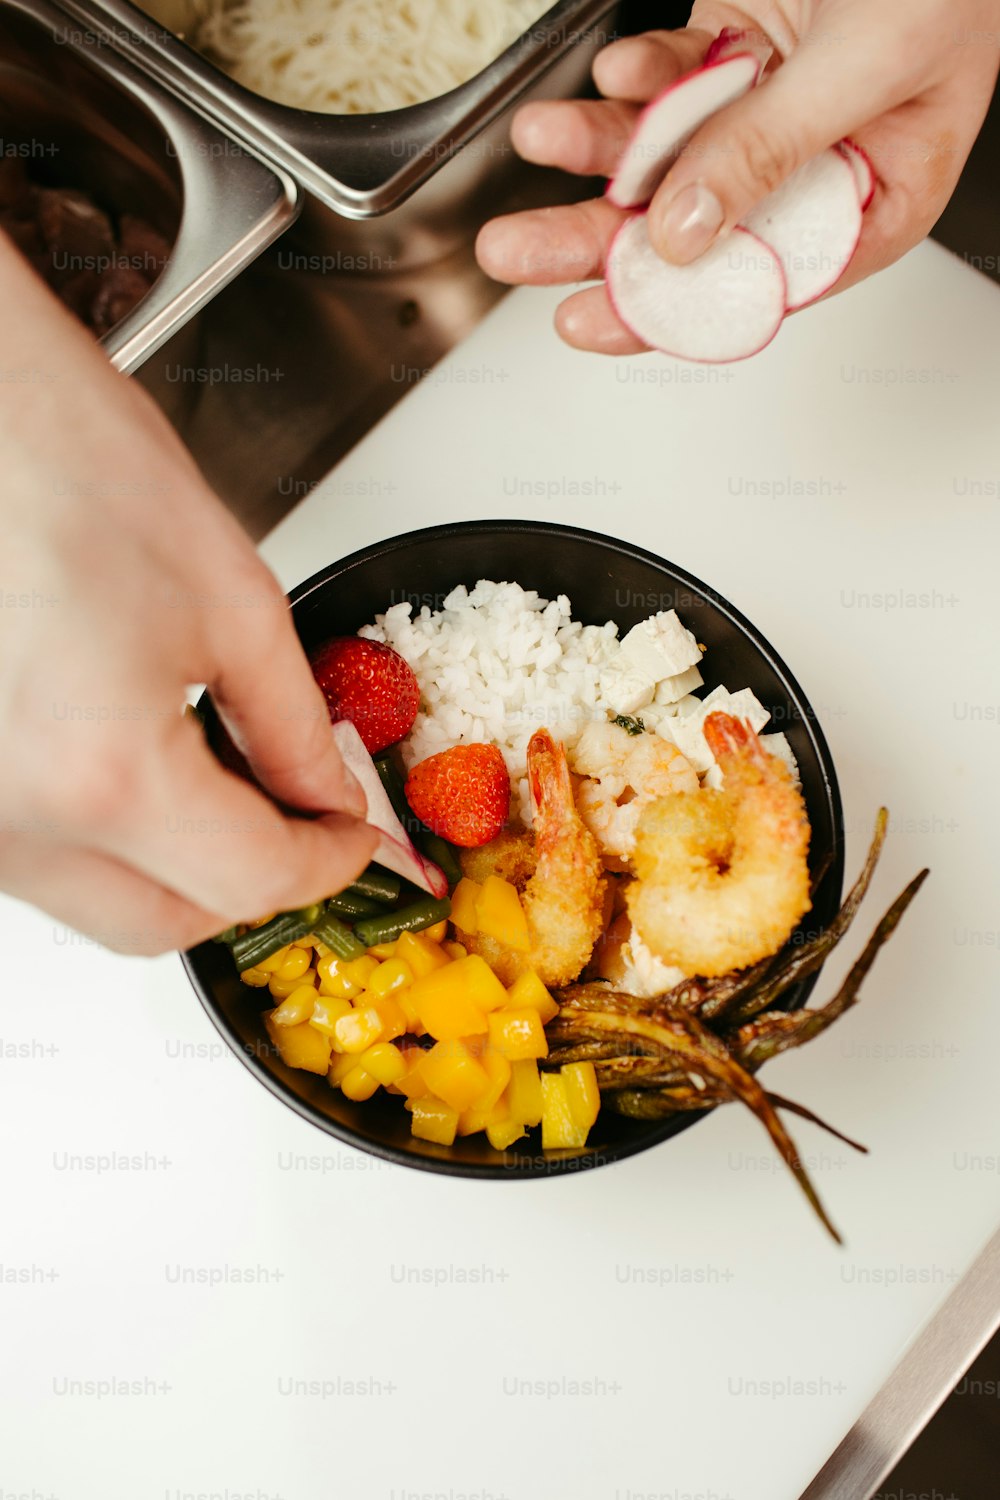 a bowl of food with shrimp, rice, and strawberries